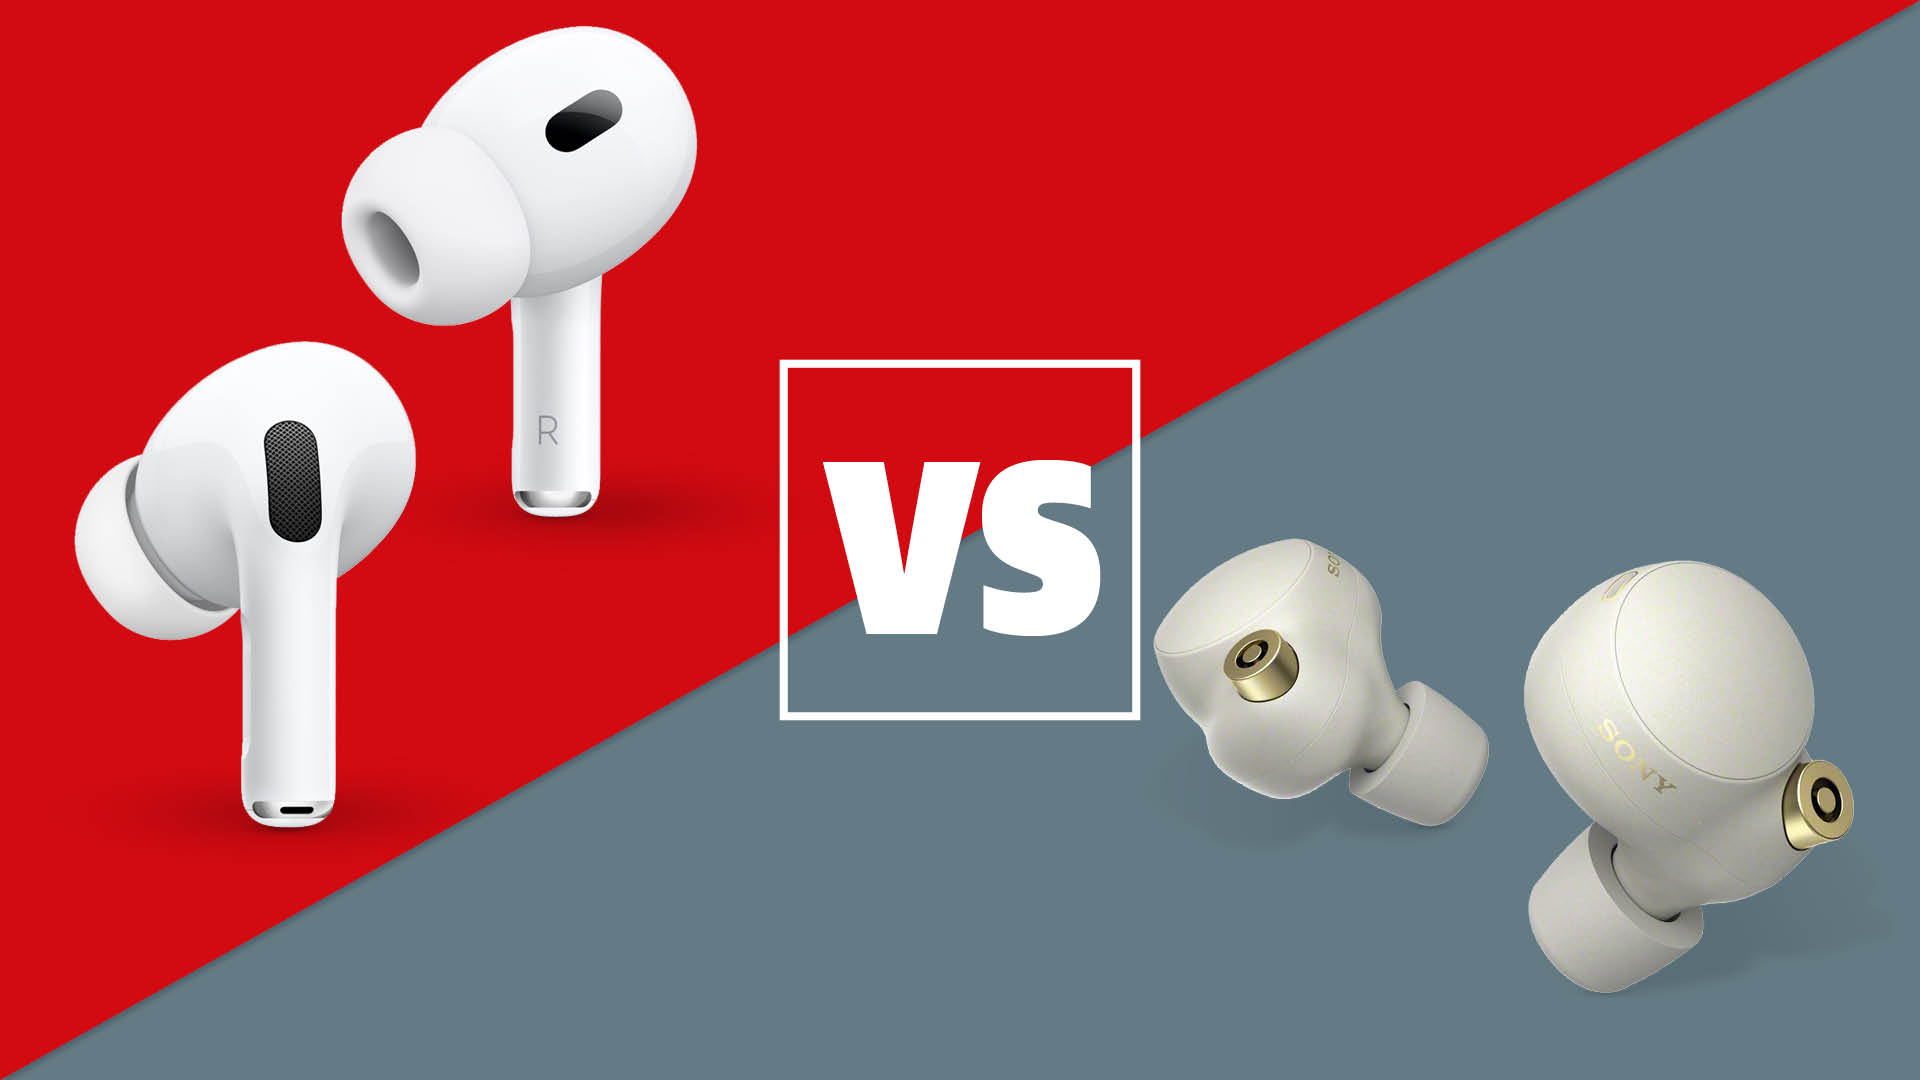 Sony WF-1000XM4 vs. Apple AirPods Pro: Which earbuds are best for you?